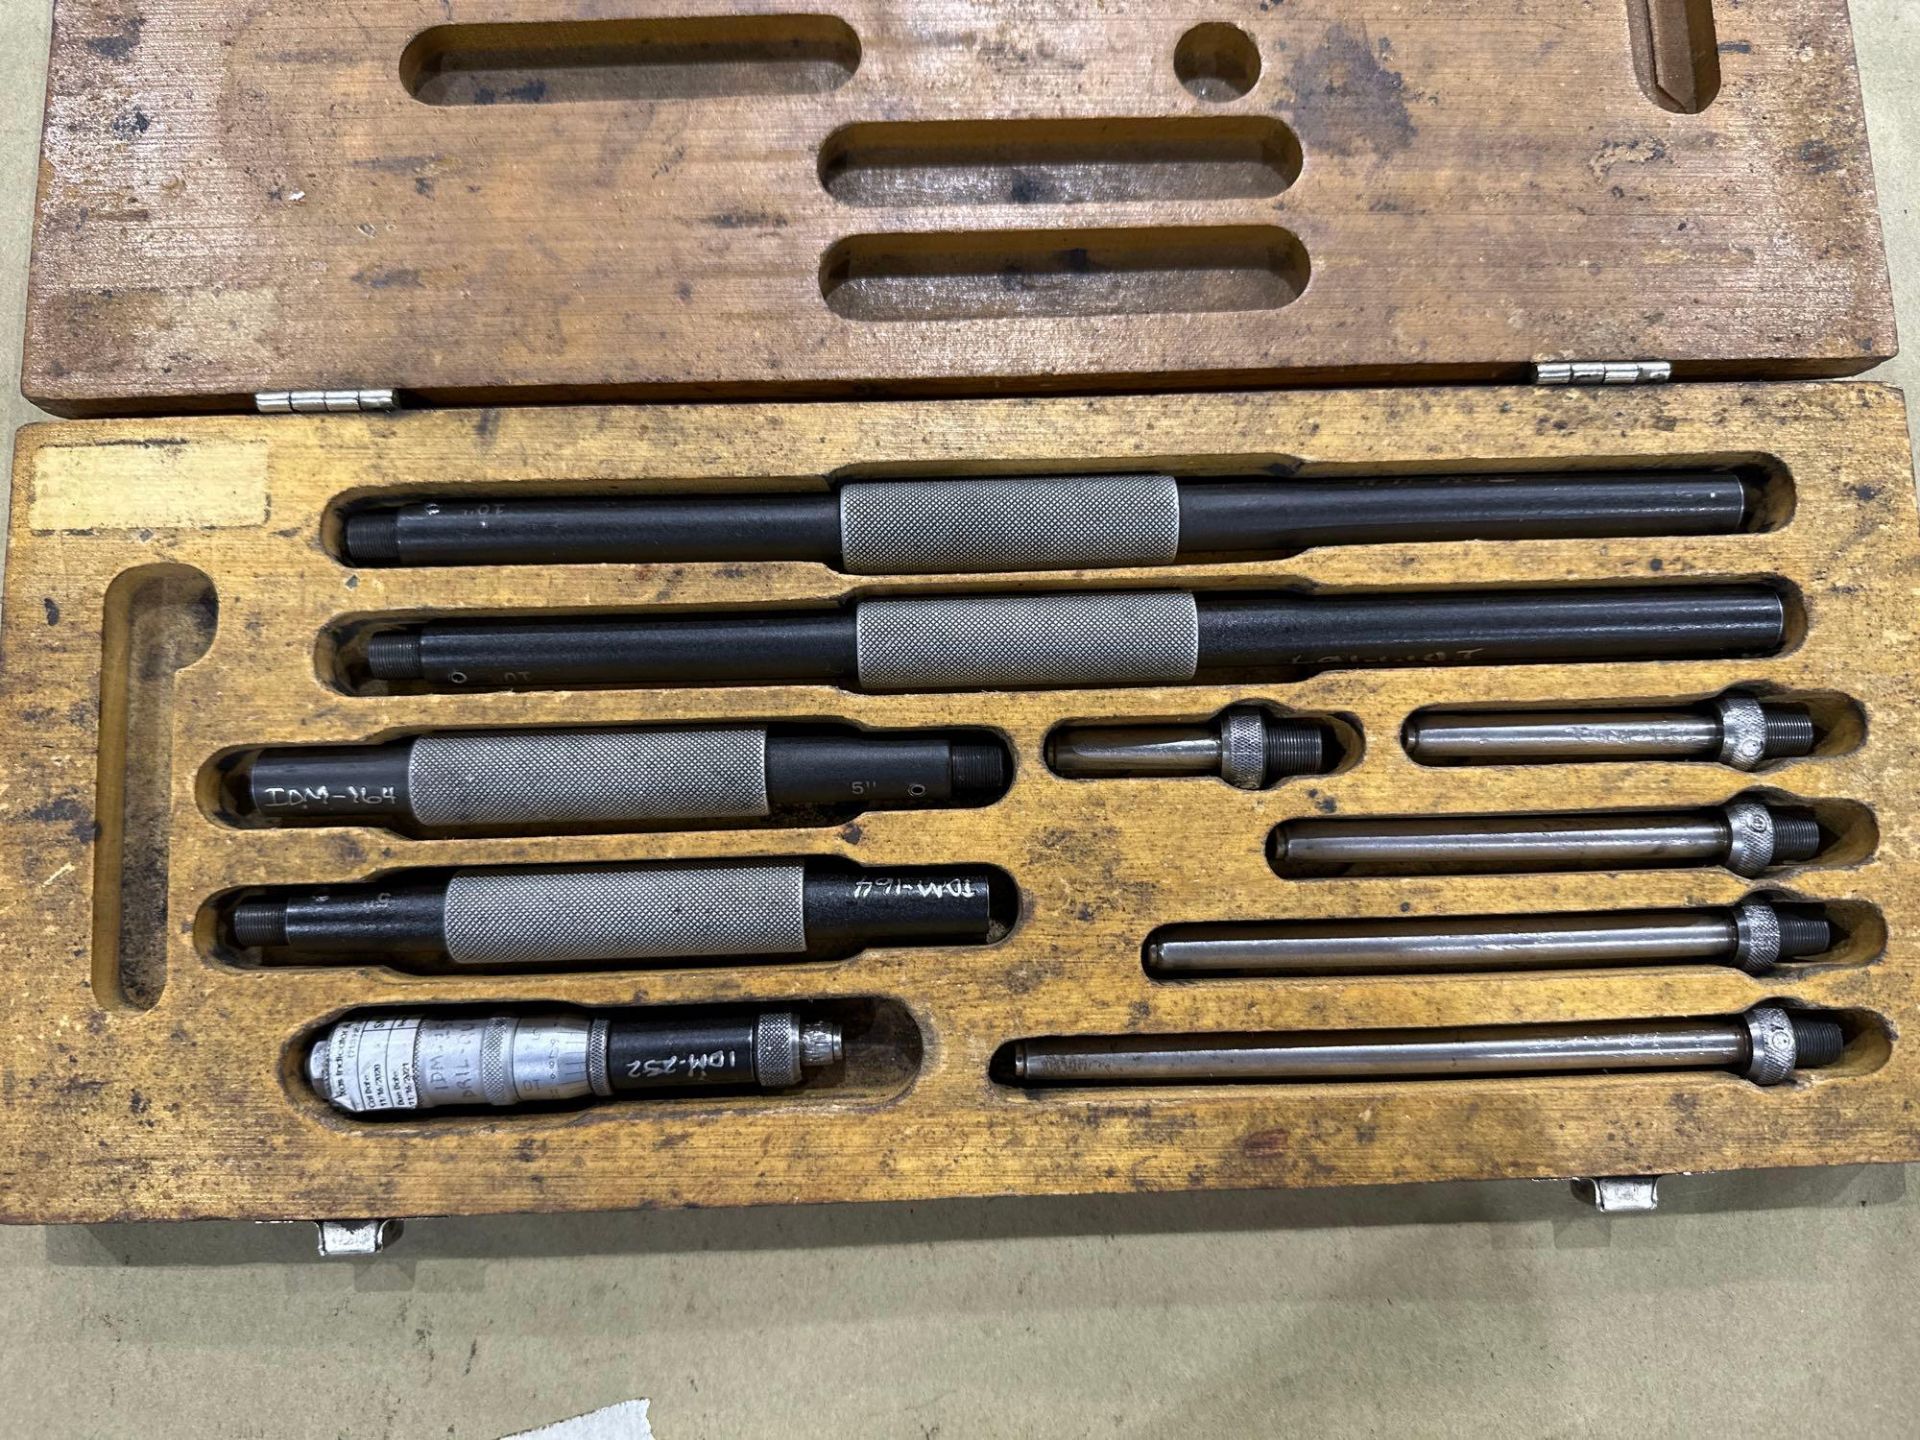 Lot of 3 Scherr-Tumico Inside Tube Micrometer Sets in wood case. See Photo. - Image 7 of 9